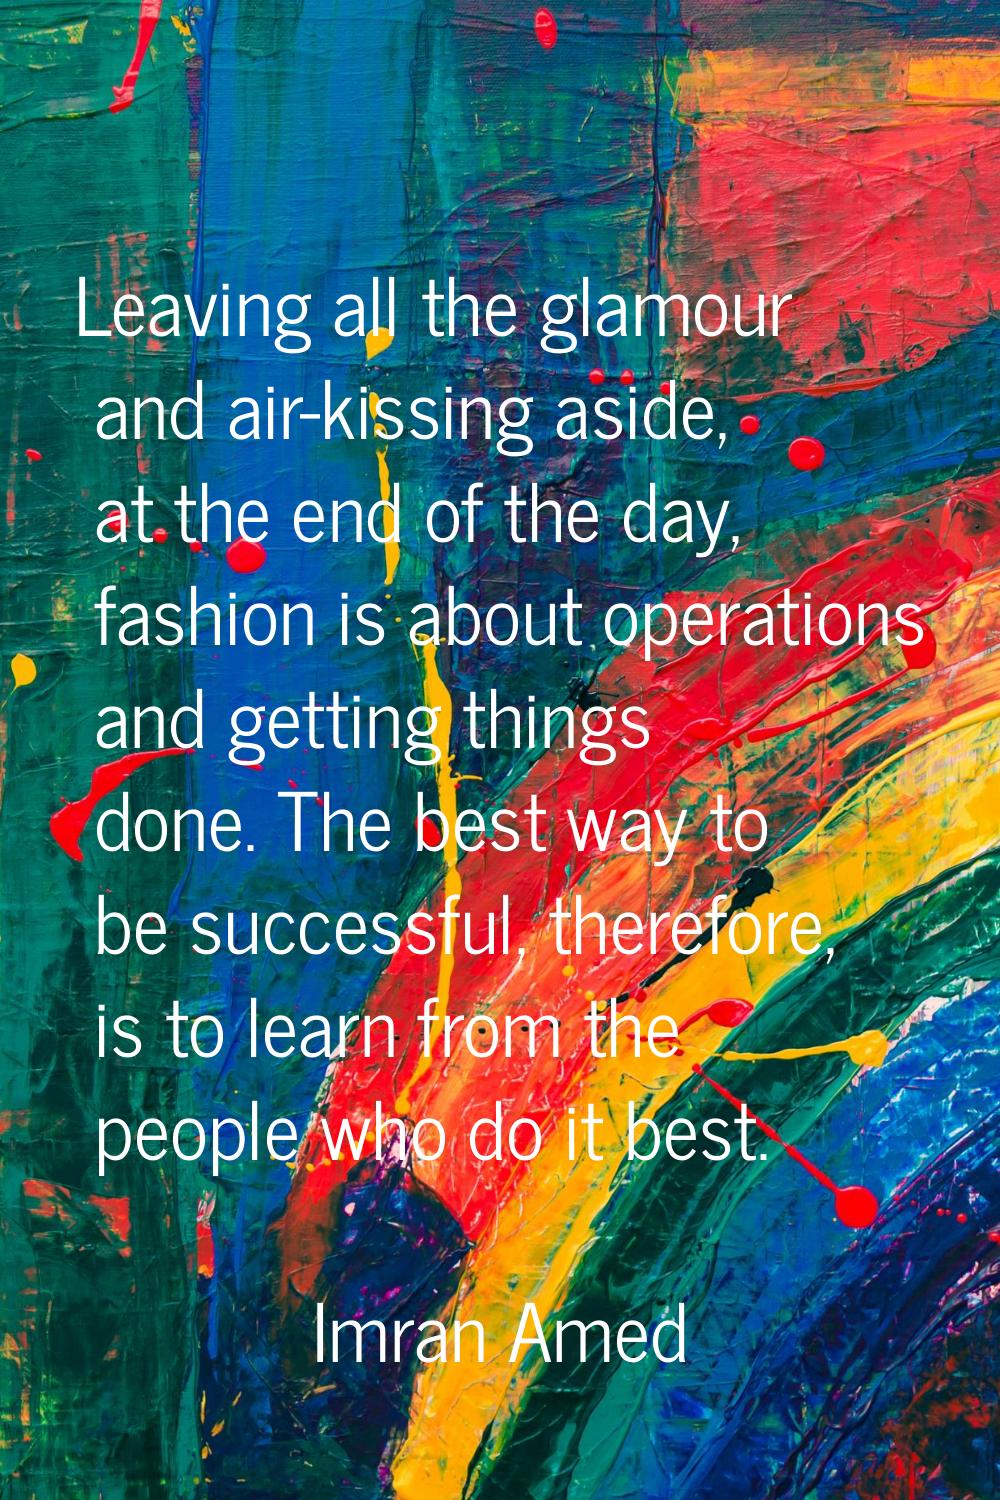 Leaving all the glamour and air-kissing aside, at the end of the day, fashion is about operations a